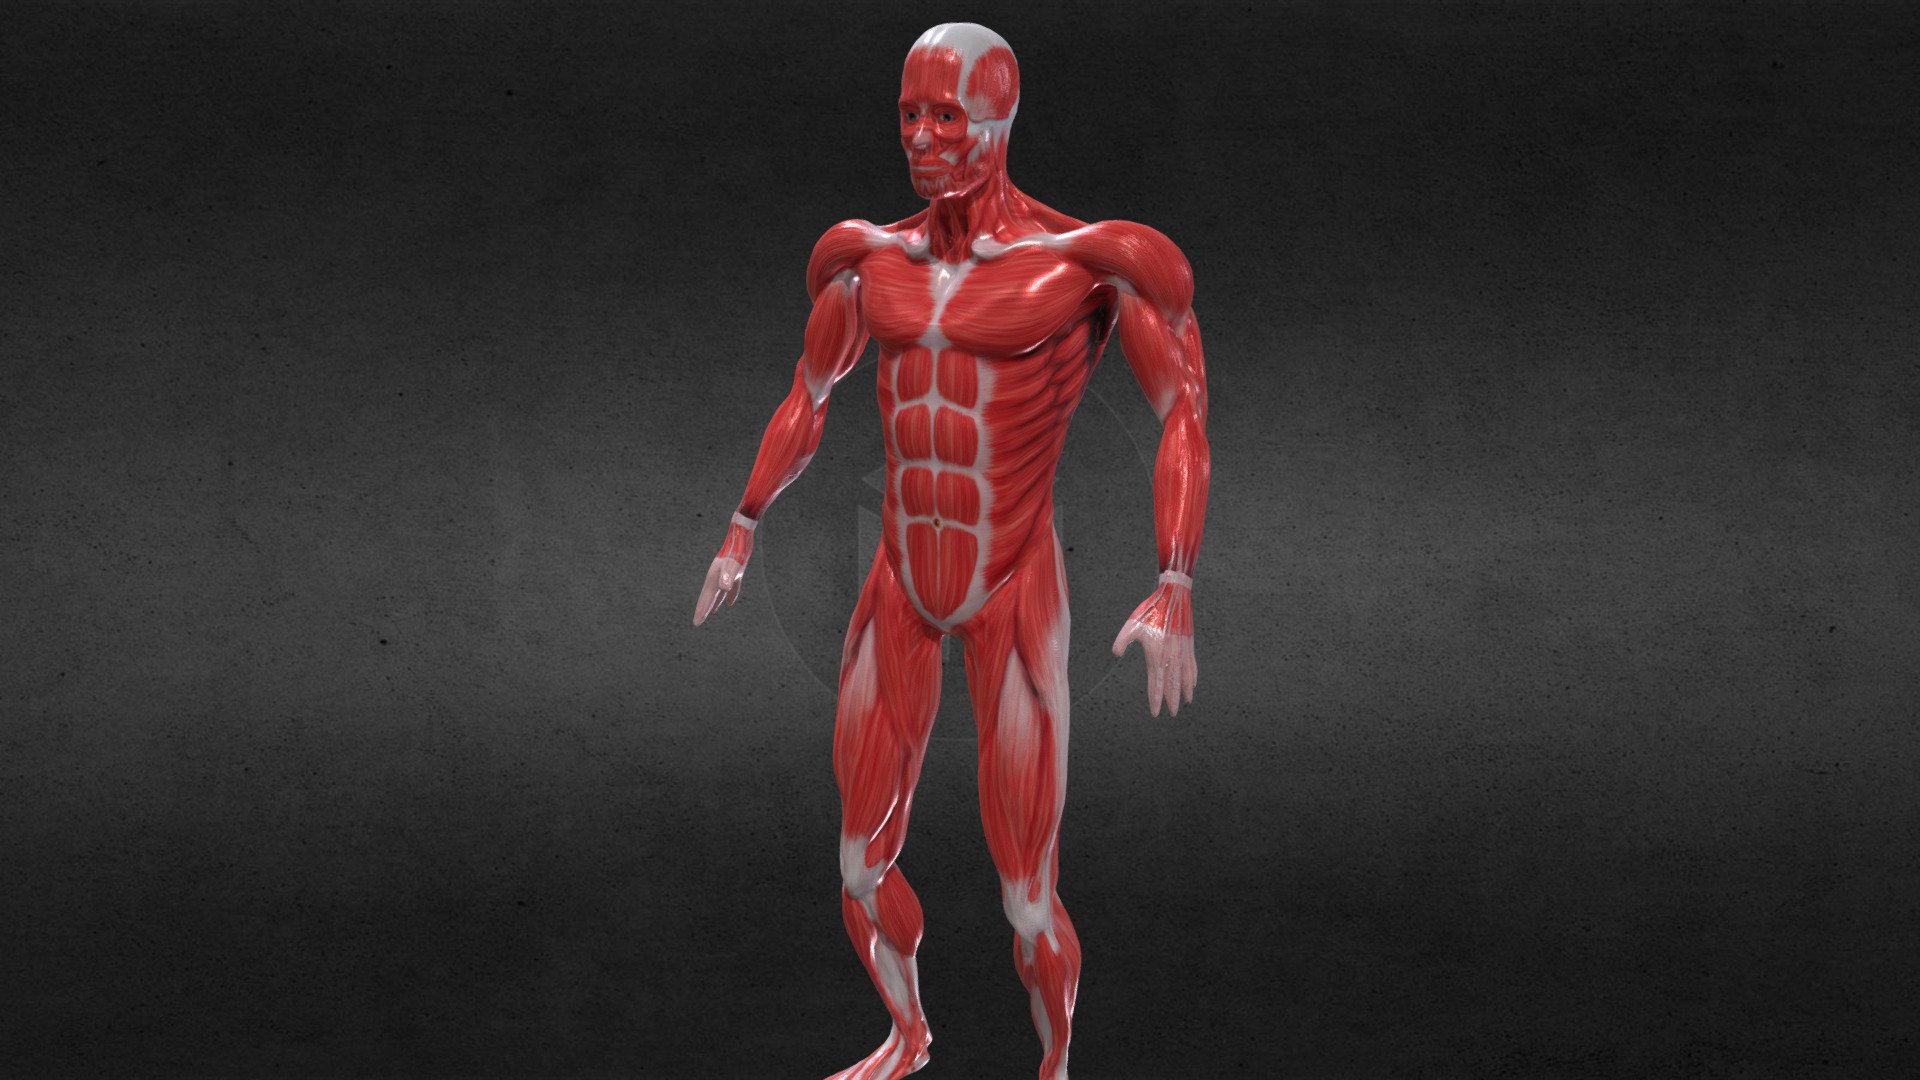 Breathing Idle Animation Anatomy Male Muscle RIGED
This is a complete character, with RIGGING bones ( skeleton ) , and with the LOOP animation of Breathing Idle, which also includes a 4K texture and a 2K normalmap 3d model